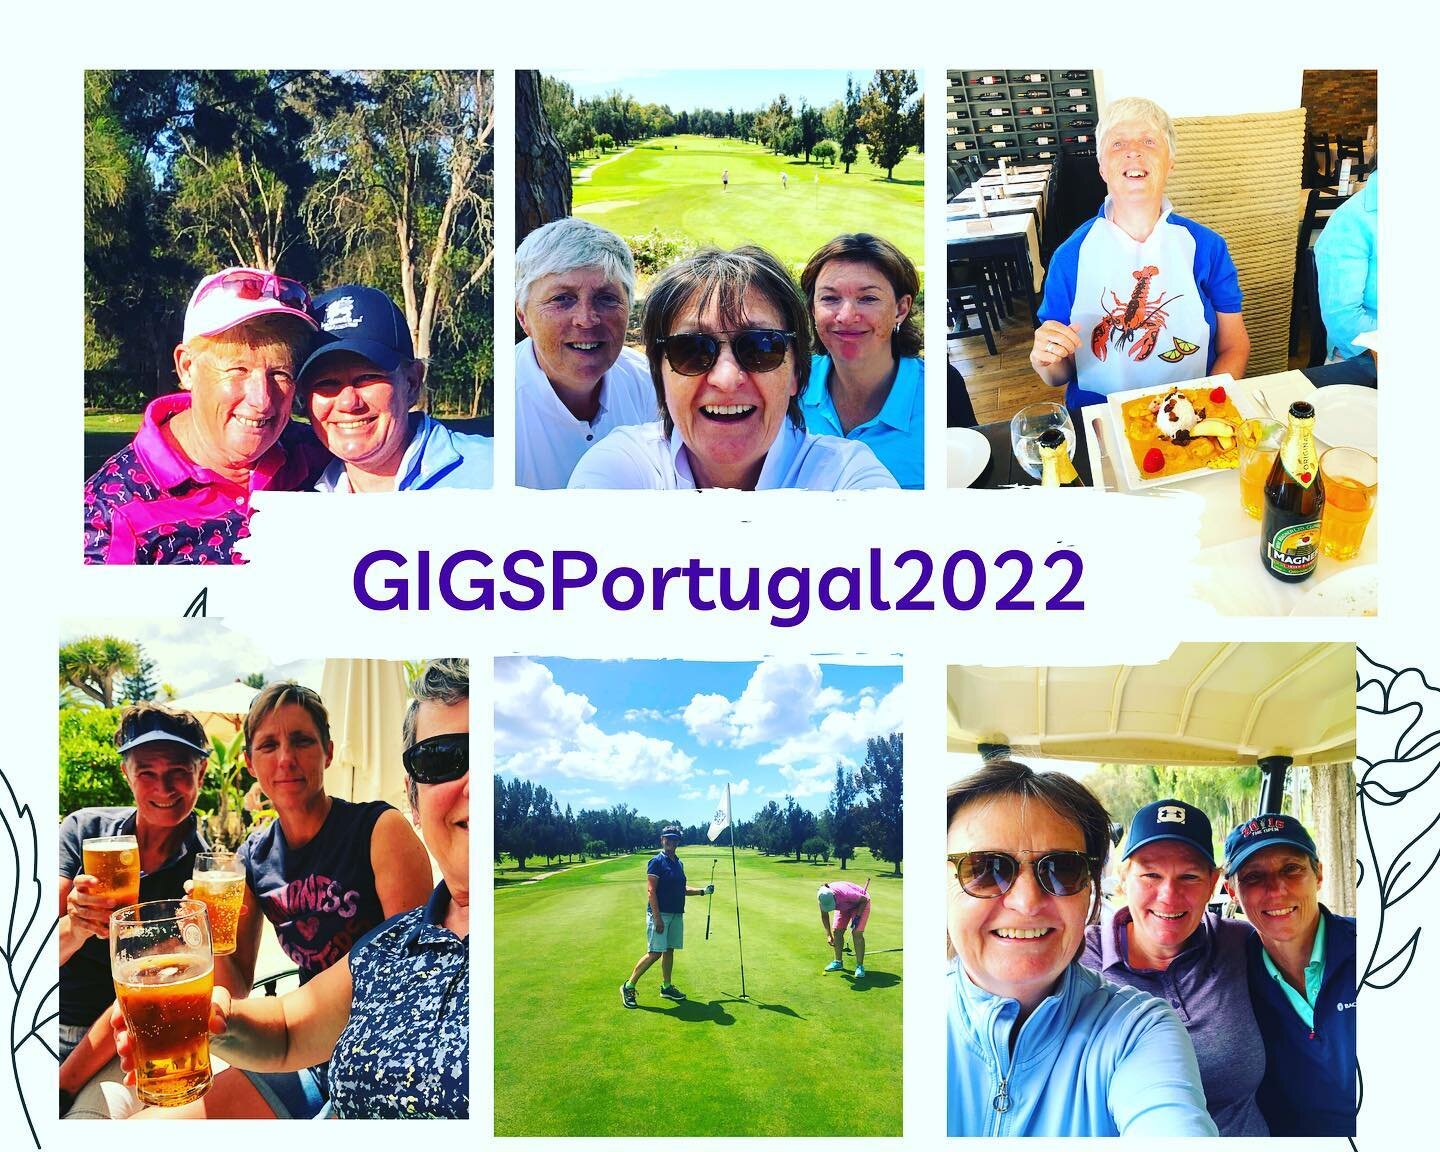 Such fun &amp; laughs we had, what a great group of women ⛳️🏳️&zwj;🌈🏳️&zwj;⚧️🇵🇹❤️ #girlsingolfsociety #lgbtwomenintogolf  #inclusivegolf